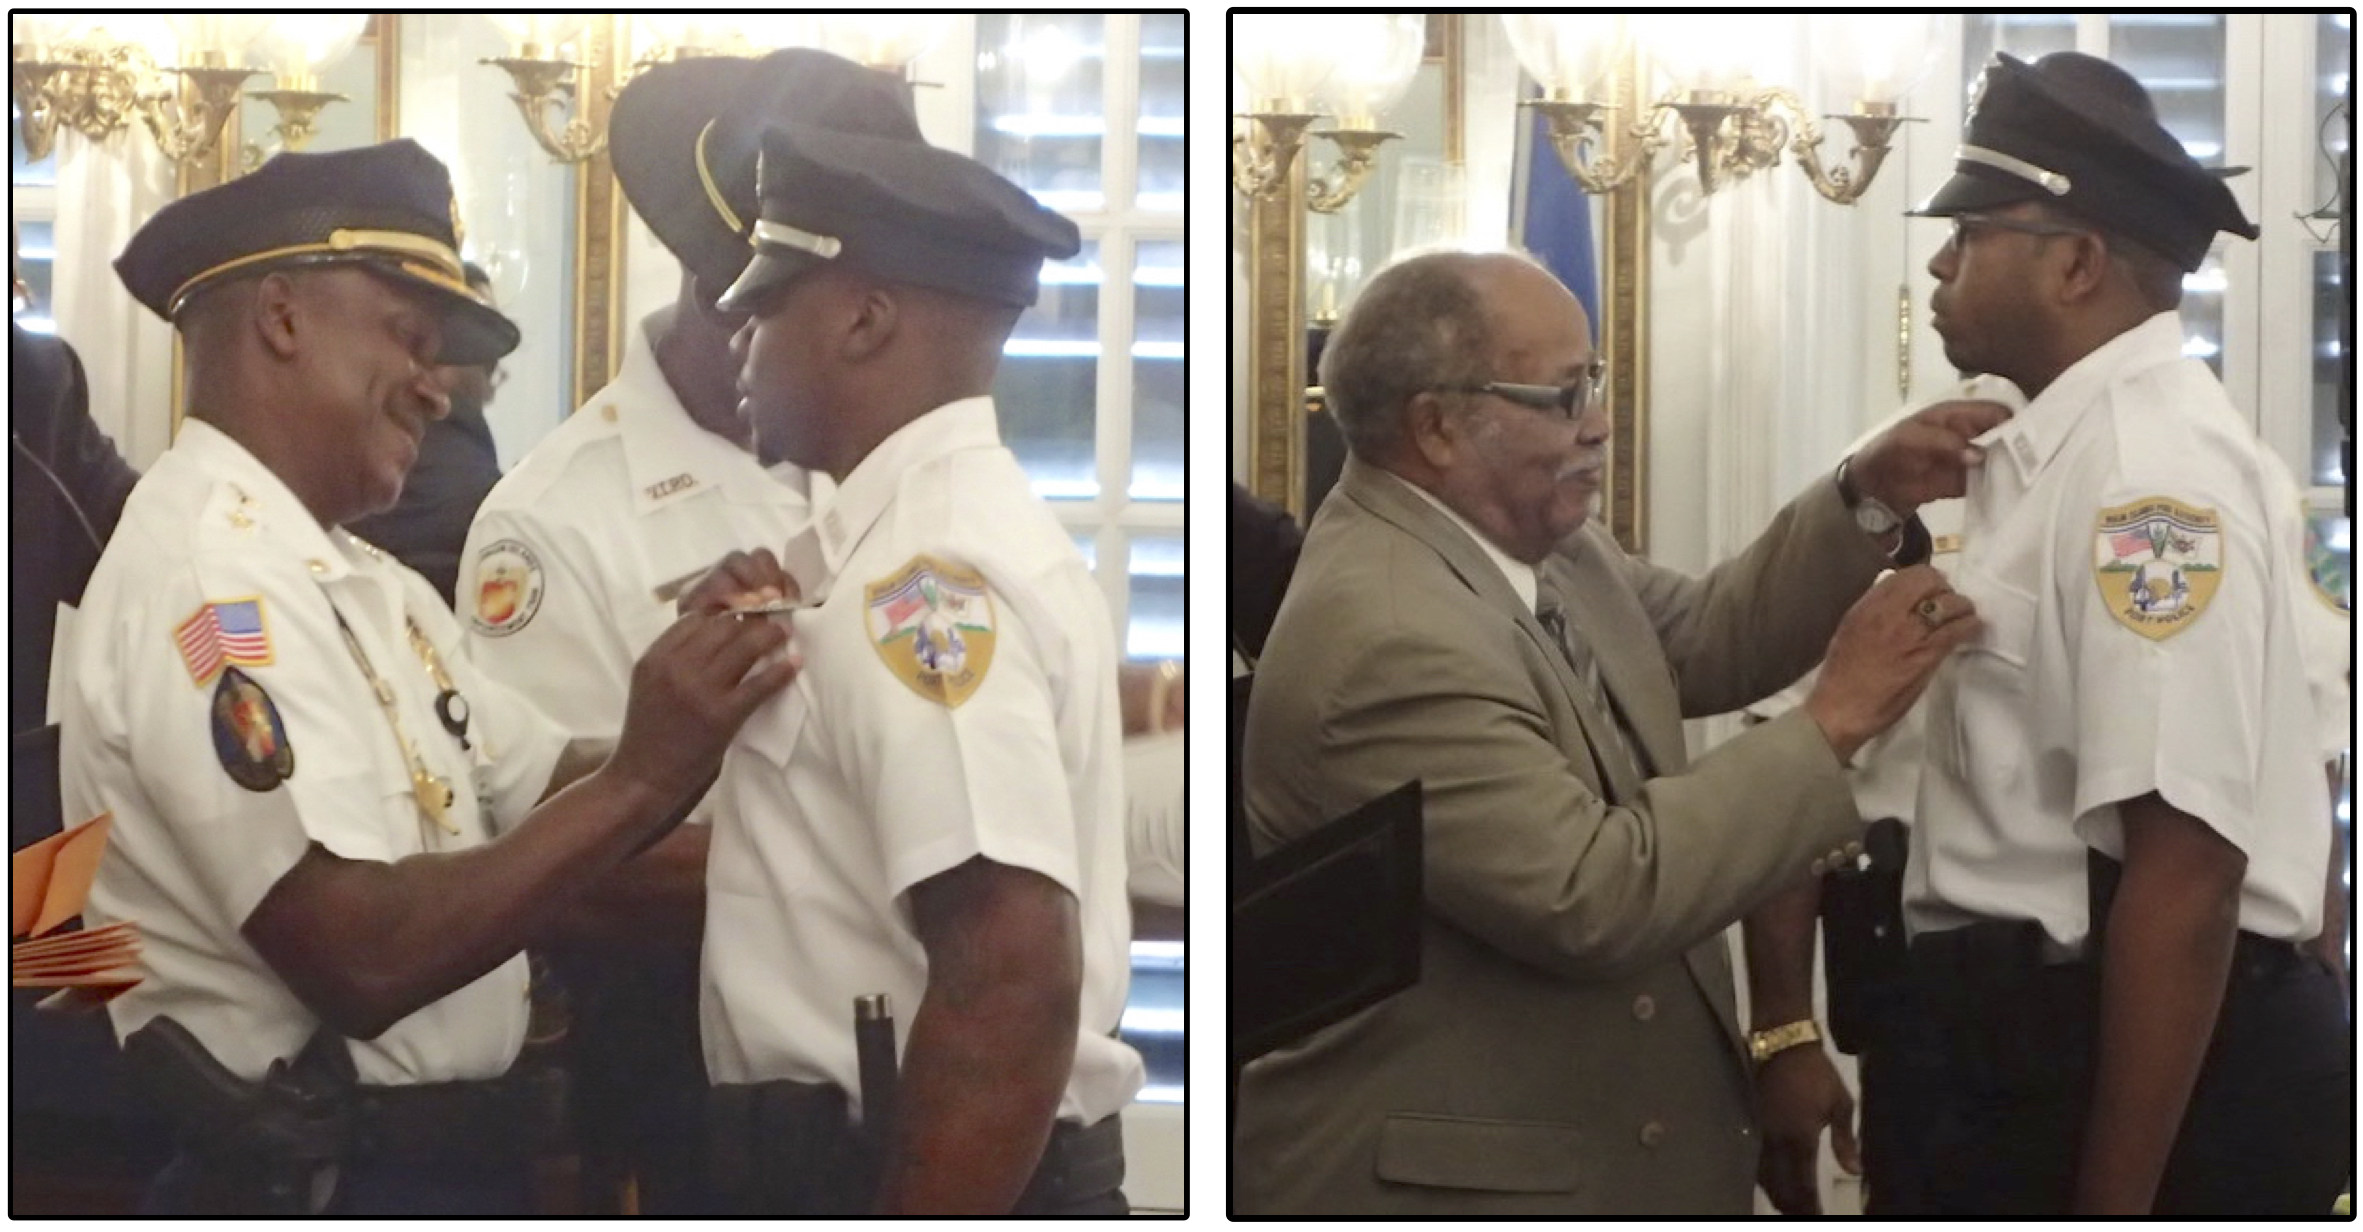  In the photo at left, former Deputy Police Chief Claude Fredericks, Jr., and his son, Claude Fredericks, III; and at right, St. Croix Police Chief Winsbut McFarlande and his son Akil McFarlande.